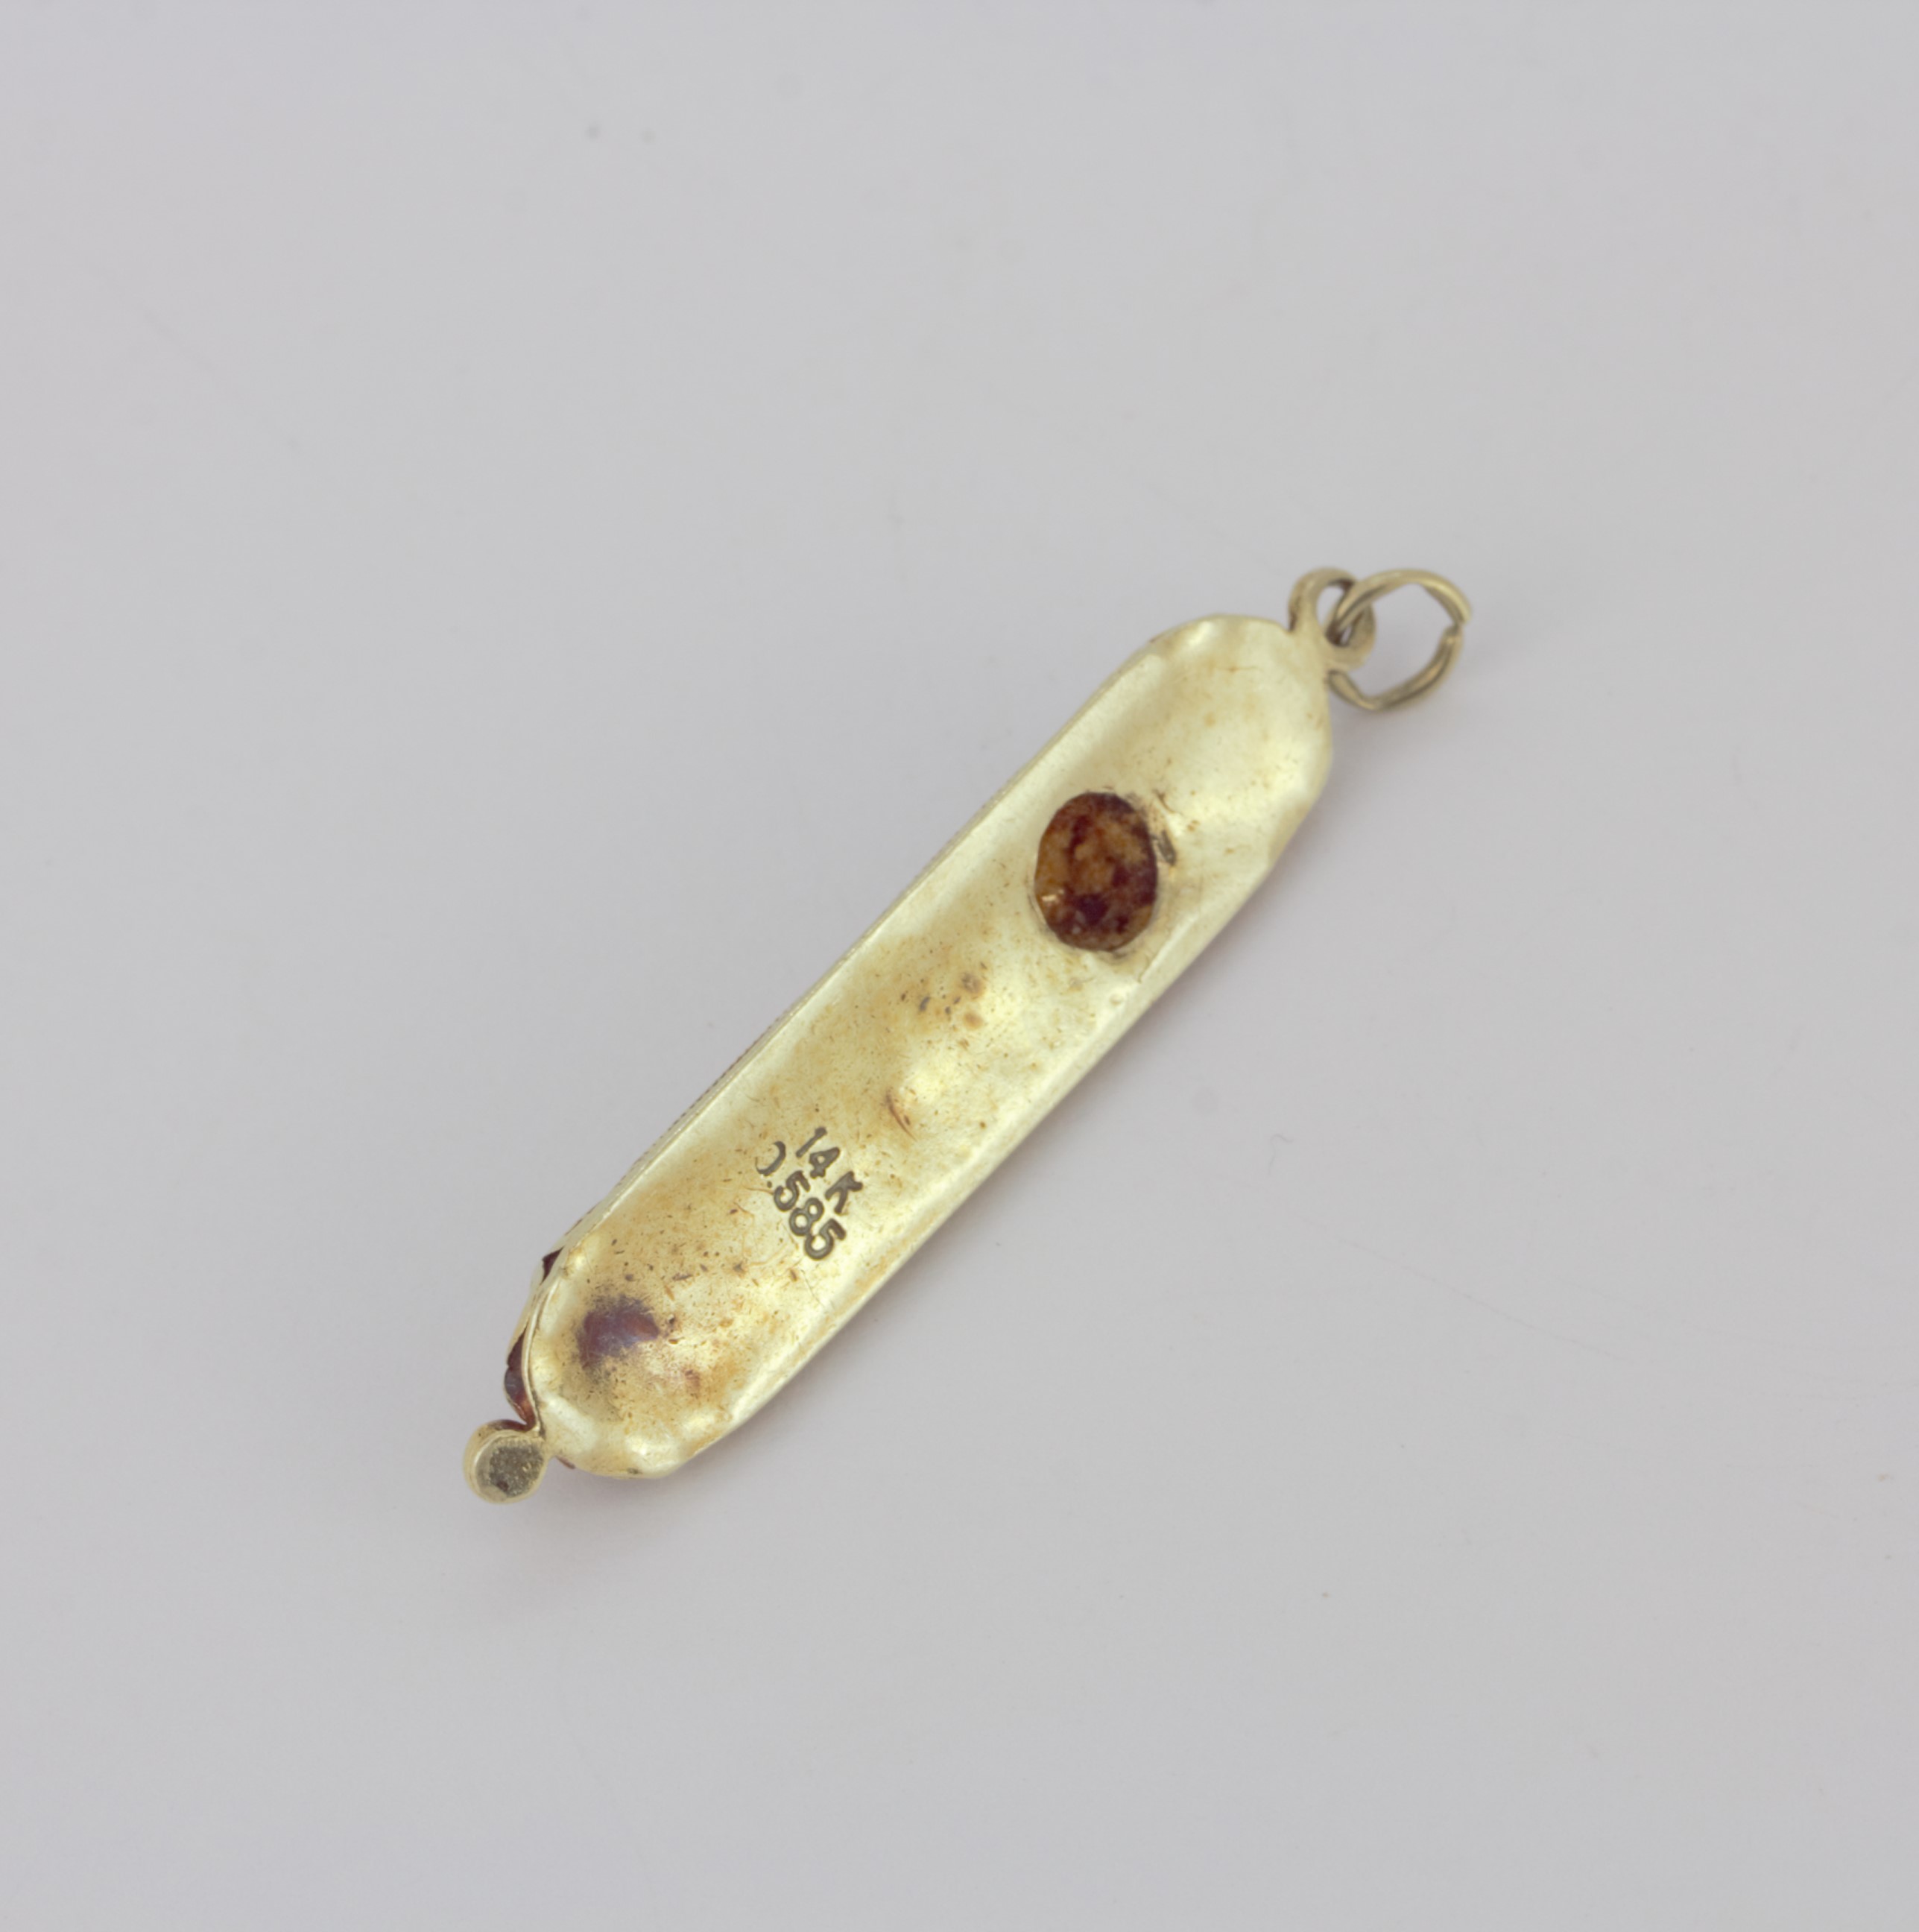 A 14ct yellow gold (stamped 585 and 14ct) filigree pendant set with turquoise and a red stone, L. - Image 2 of 2